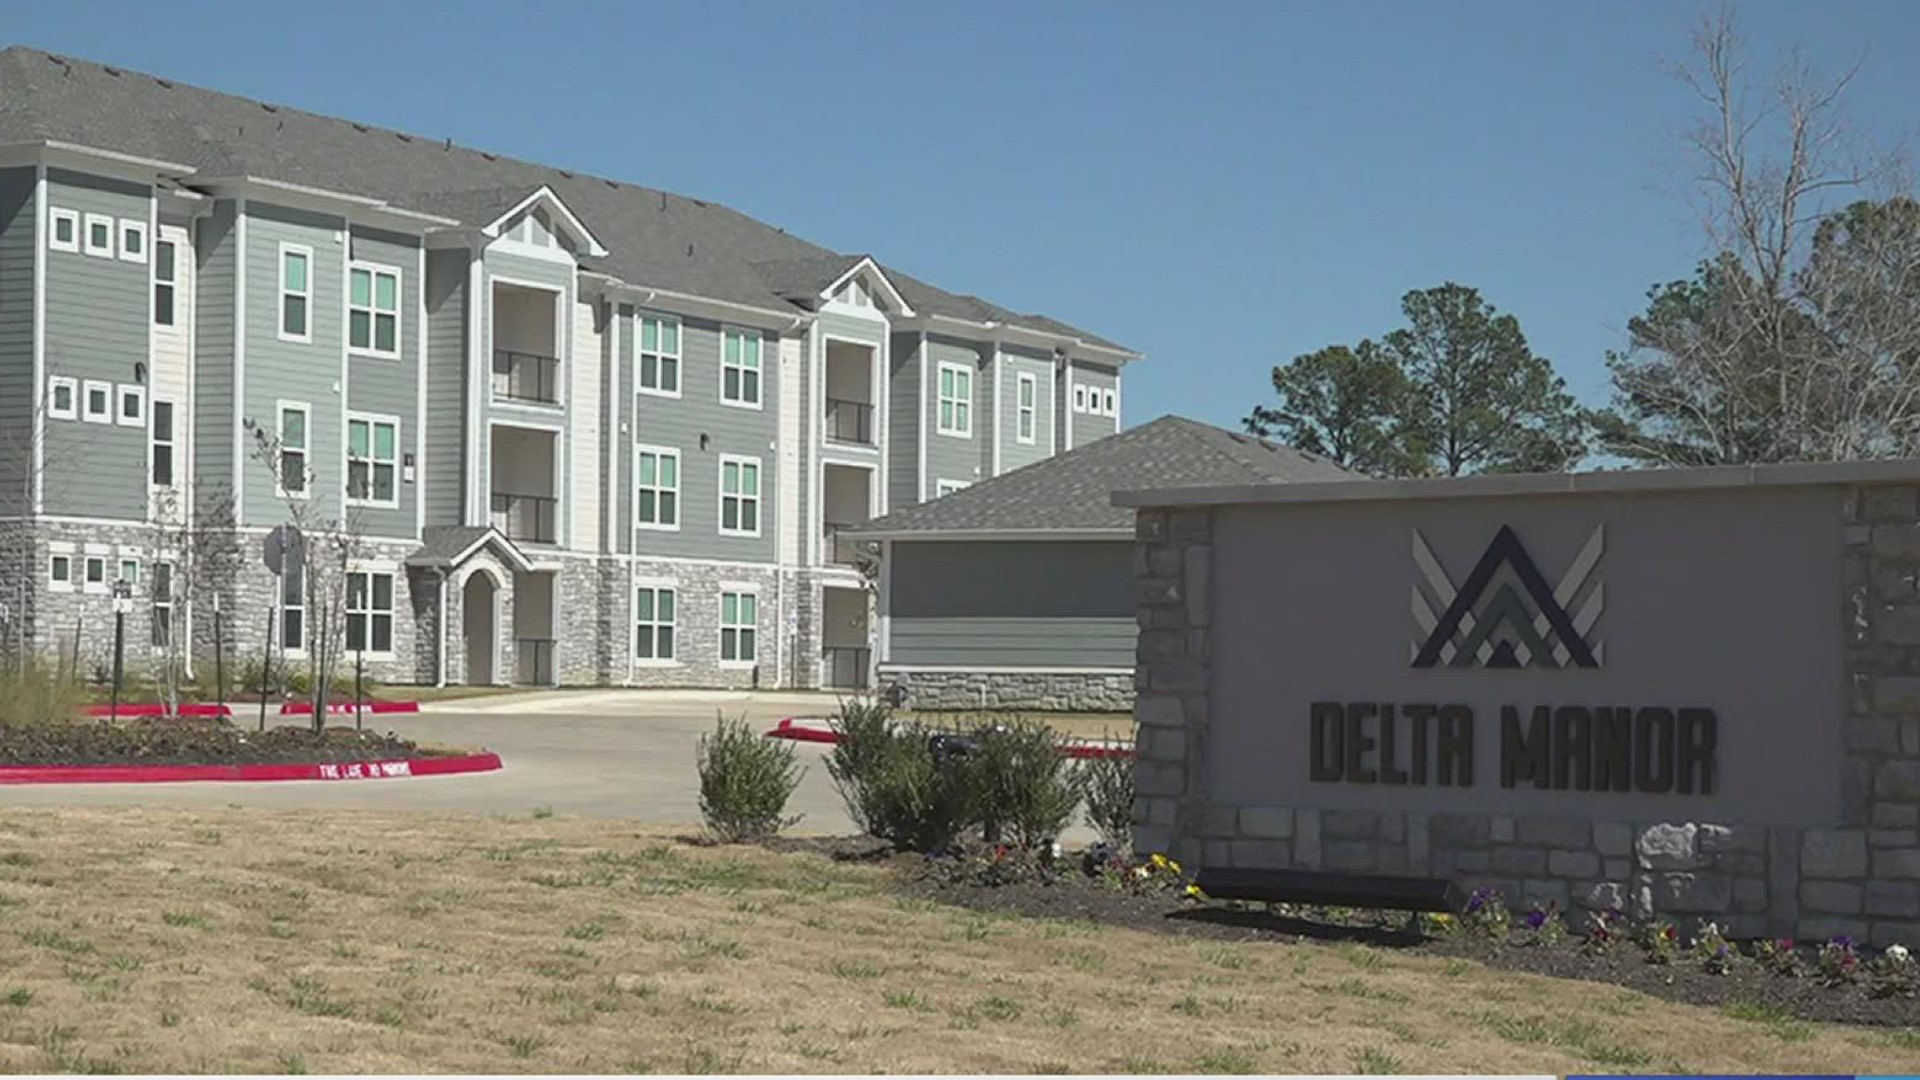 Delta Manor apartments is one of the many projects built to replace affordable rental housing damaged or destroyed by Harvey.